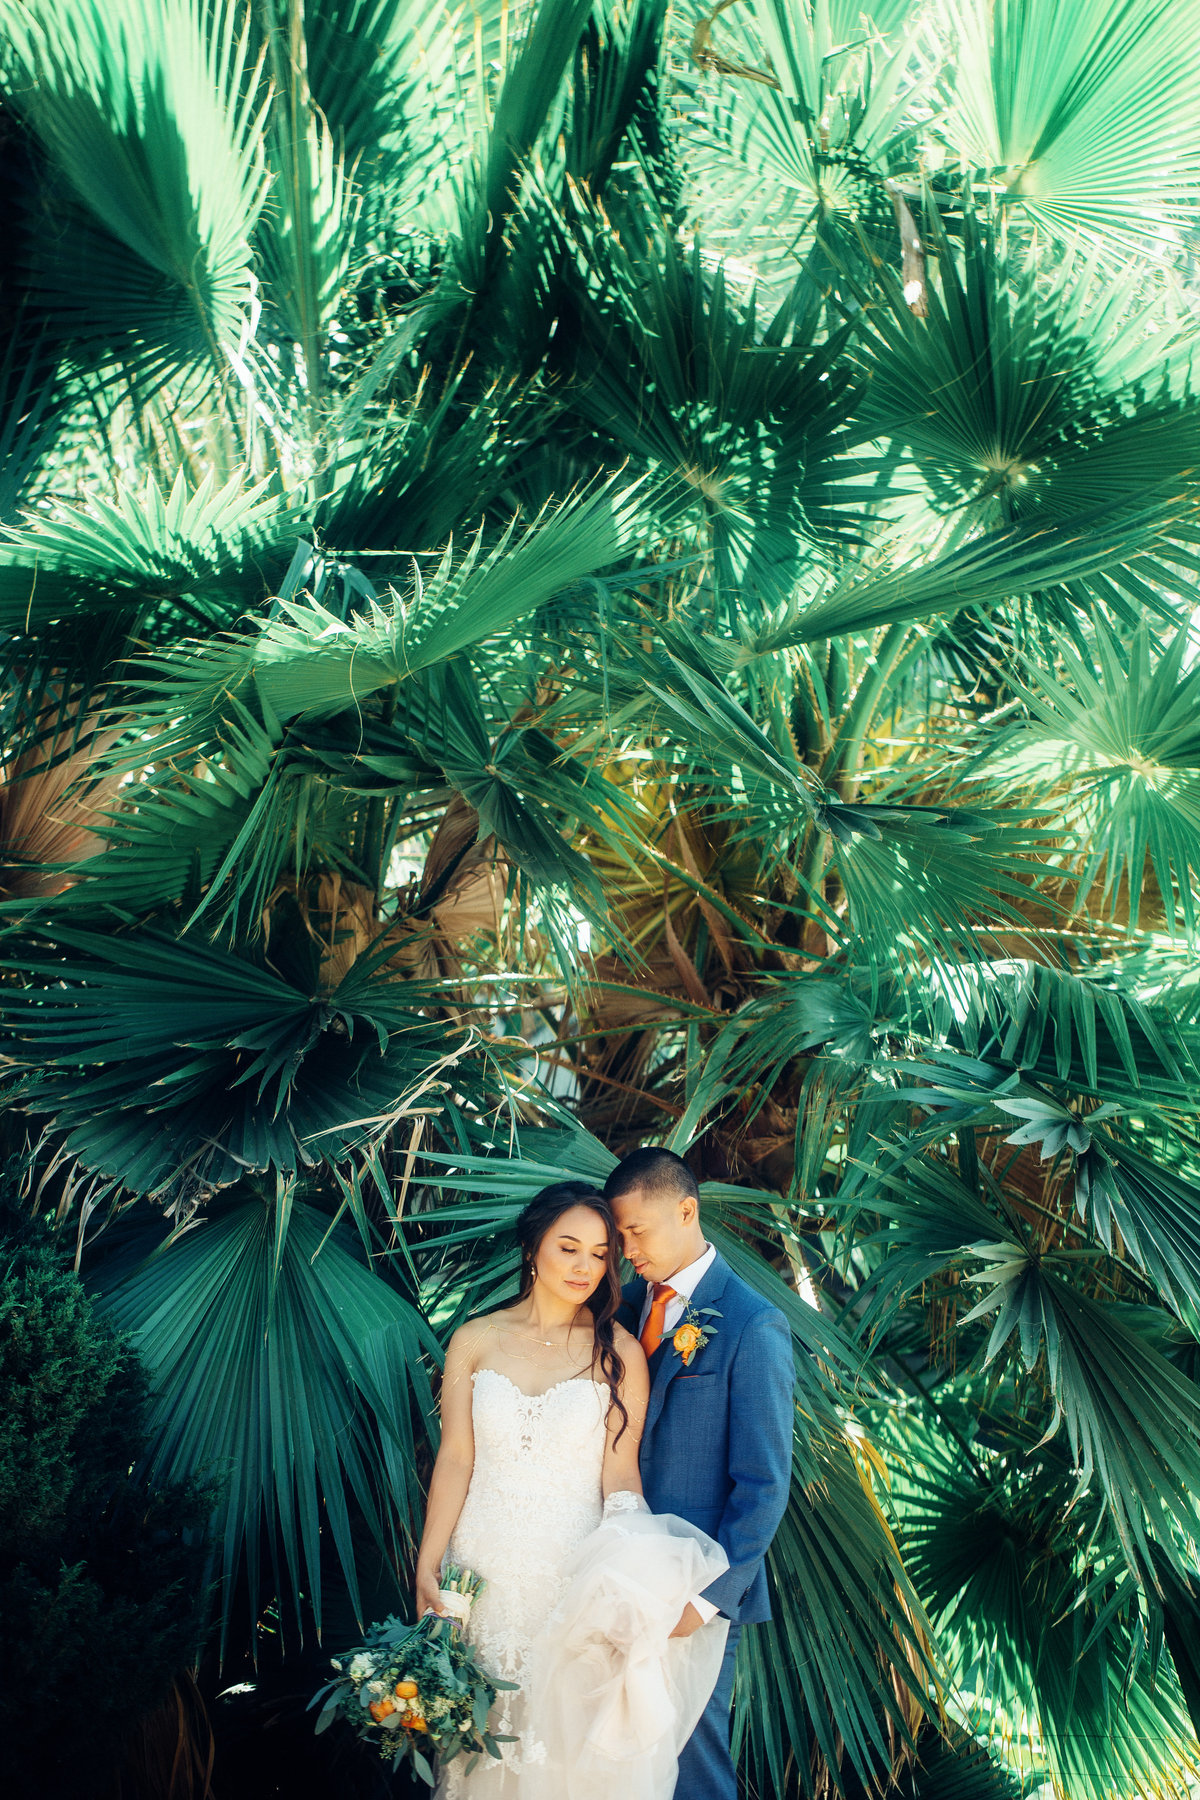 Wedding Photograph Of Bride And Groom In Front Of a Tree Los Angeles